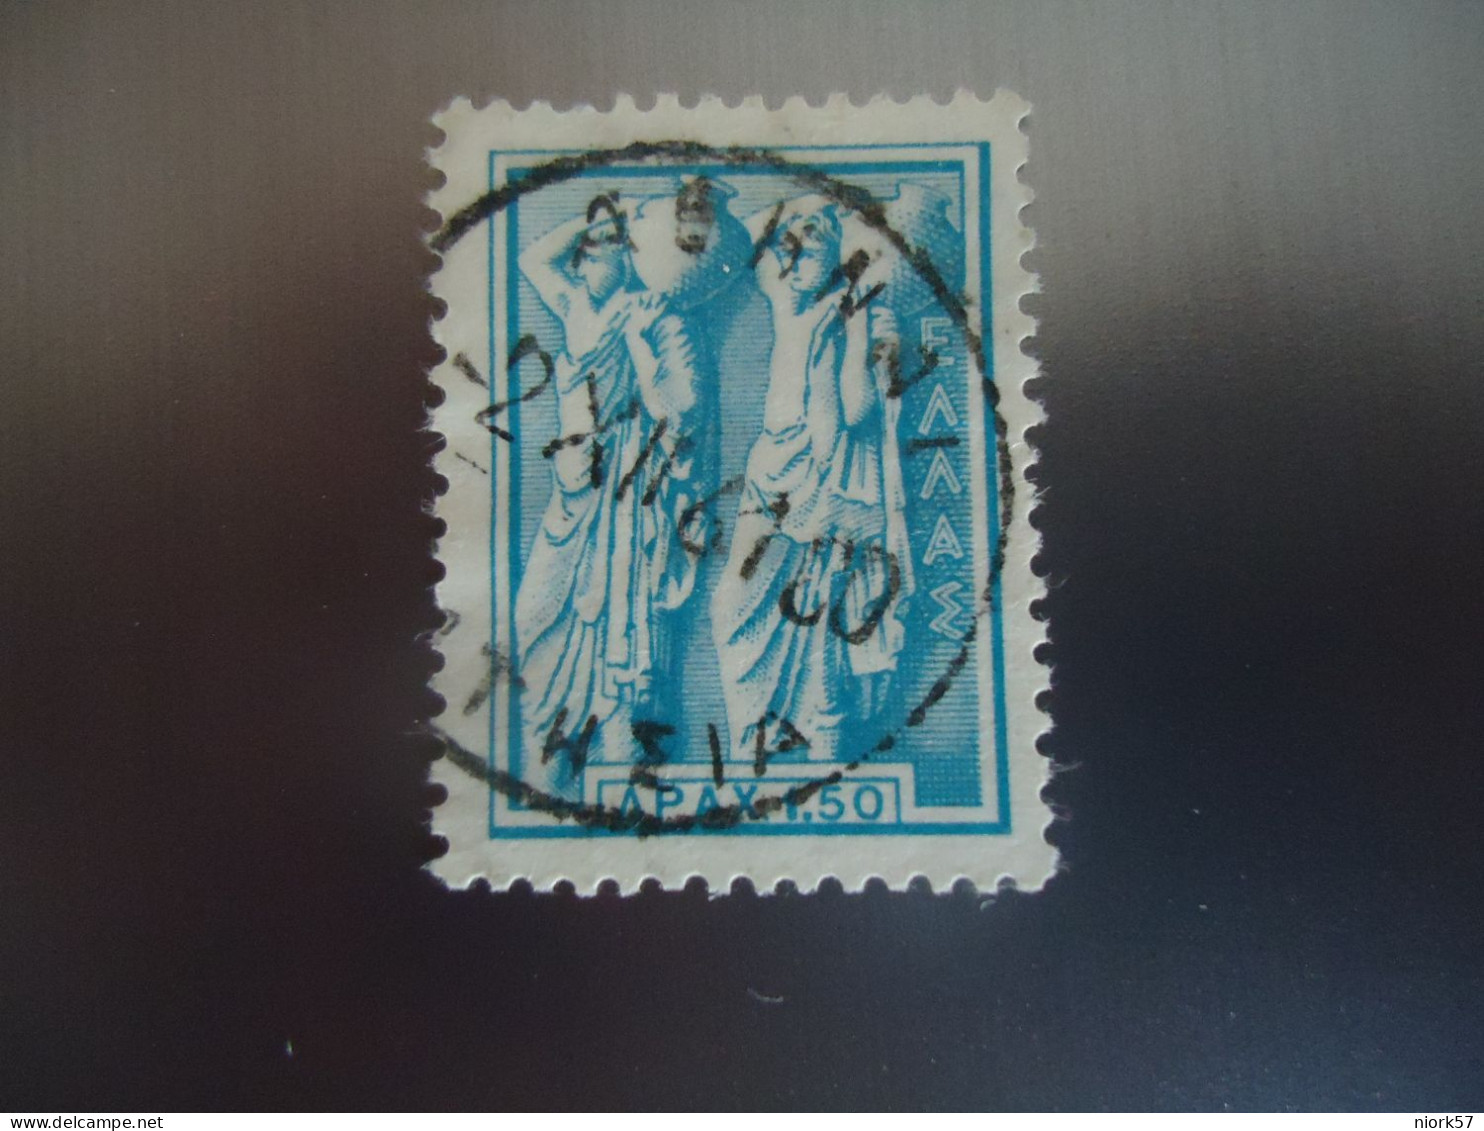 GREECE   USED STAMPS  POSTMARK  ΑΘΗΝΑΙ   ΠΑΤΗΣΙΑ 1961 - Oblitérés